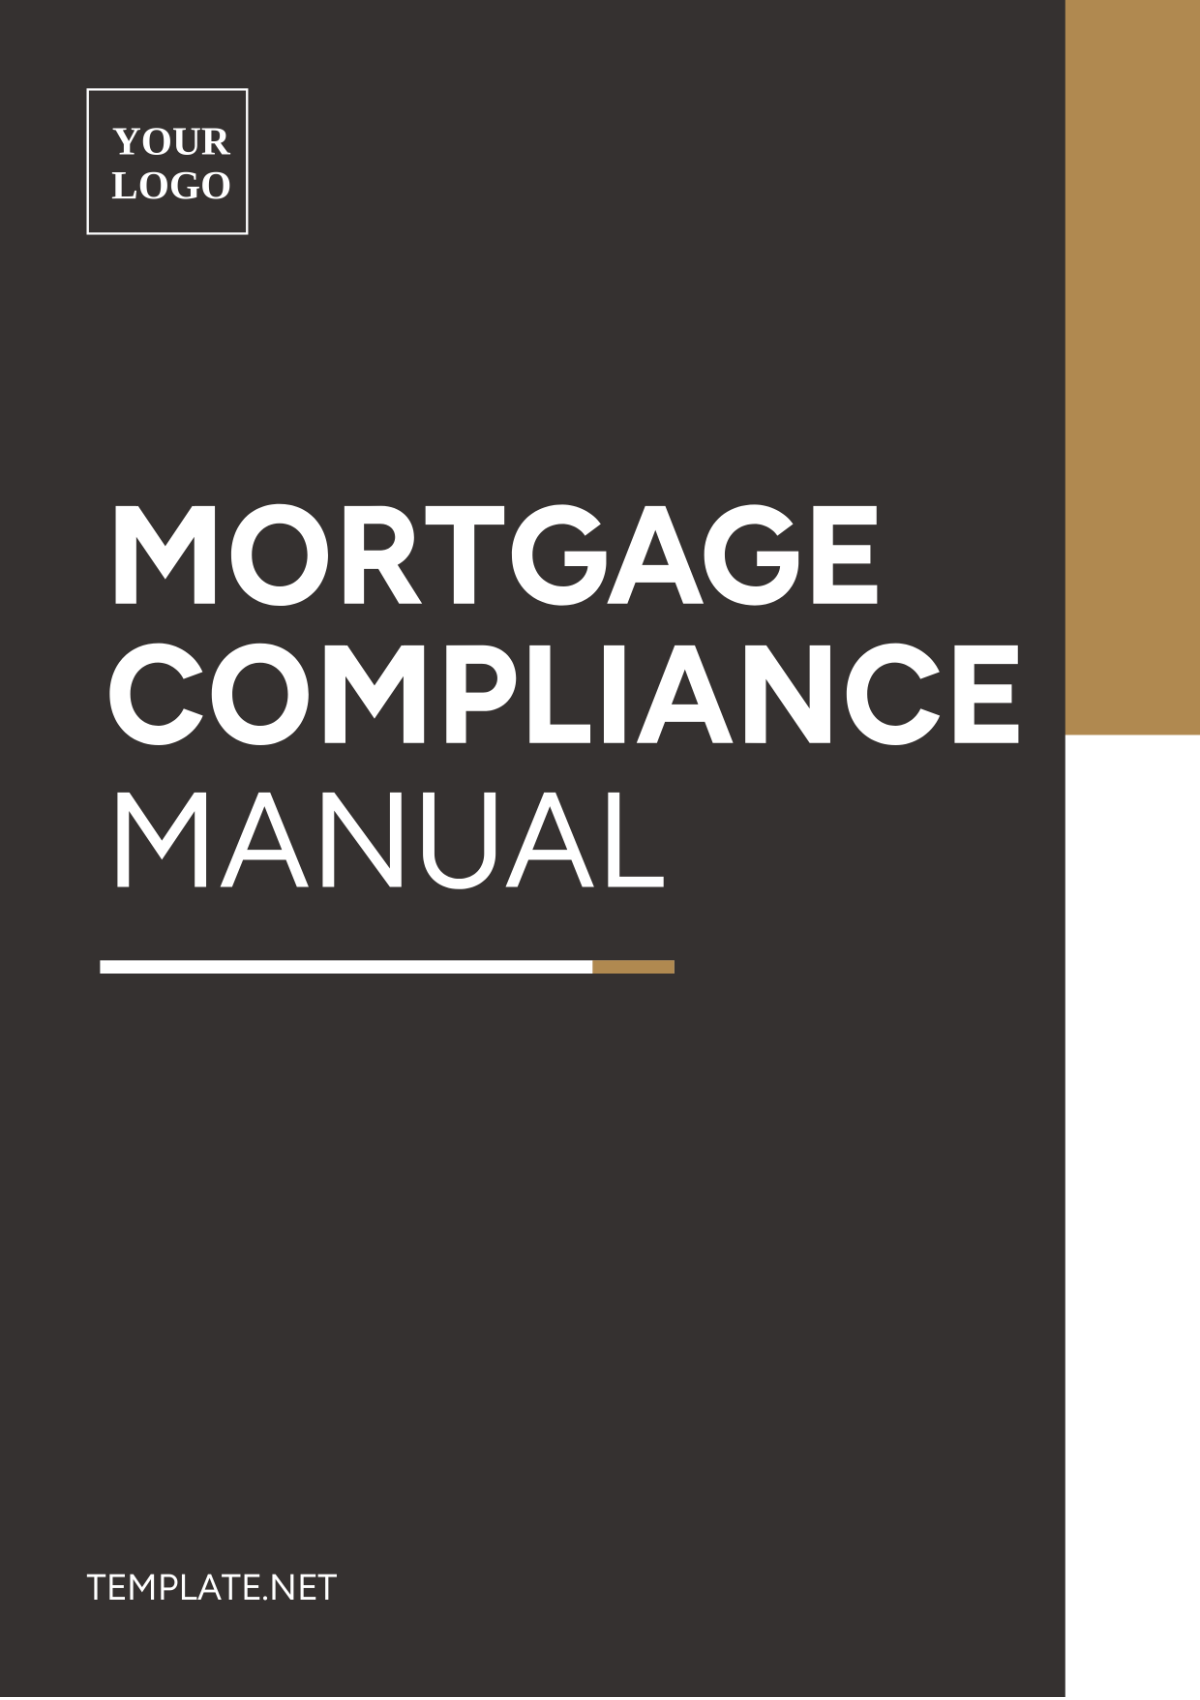 Free Mortgage Compliance Manual Template